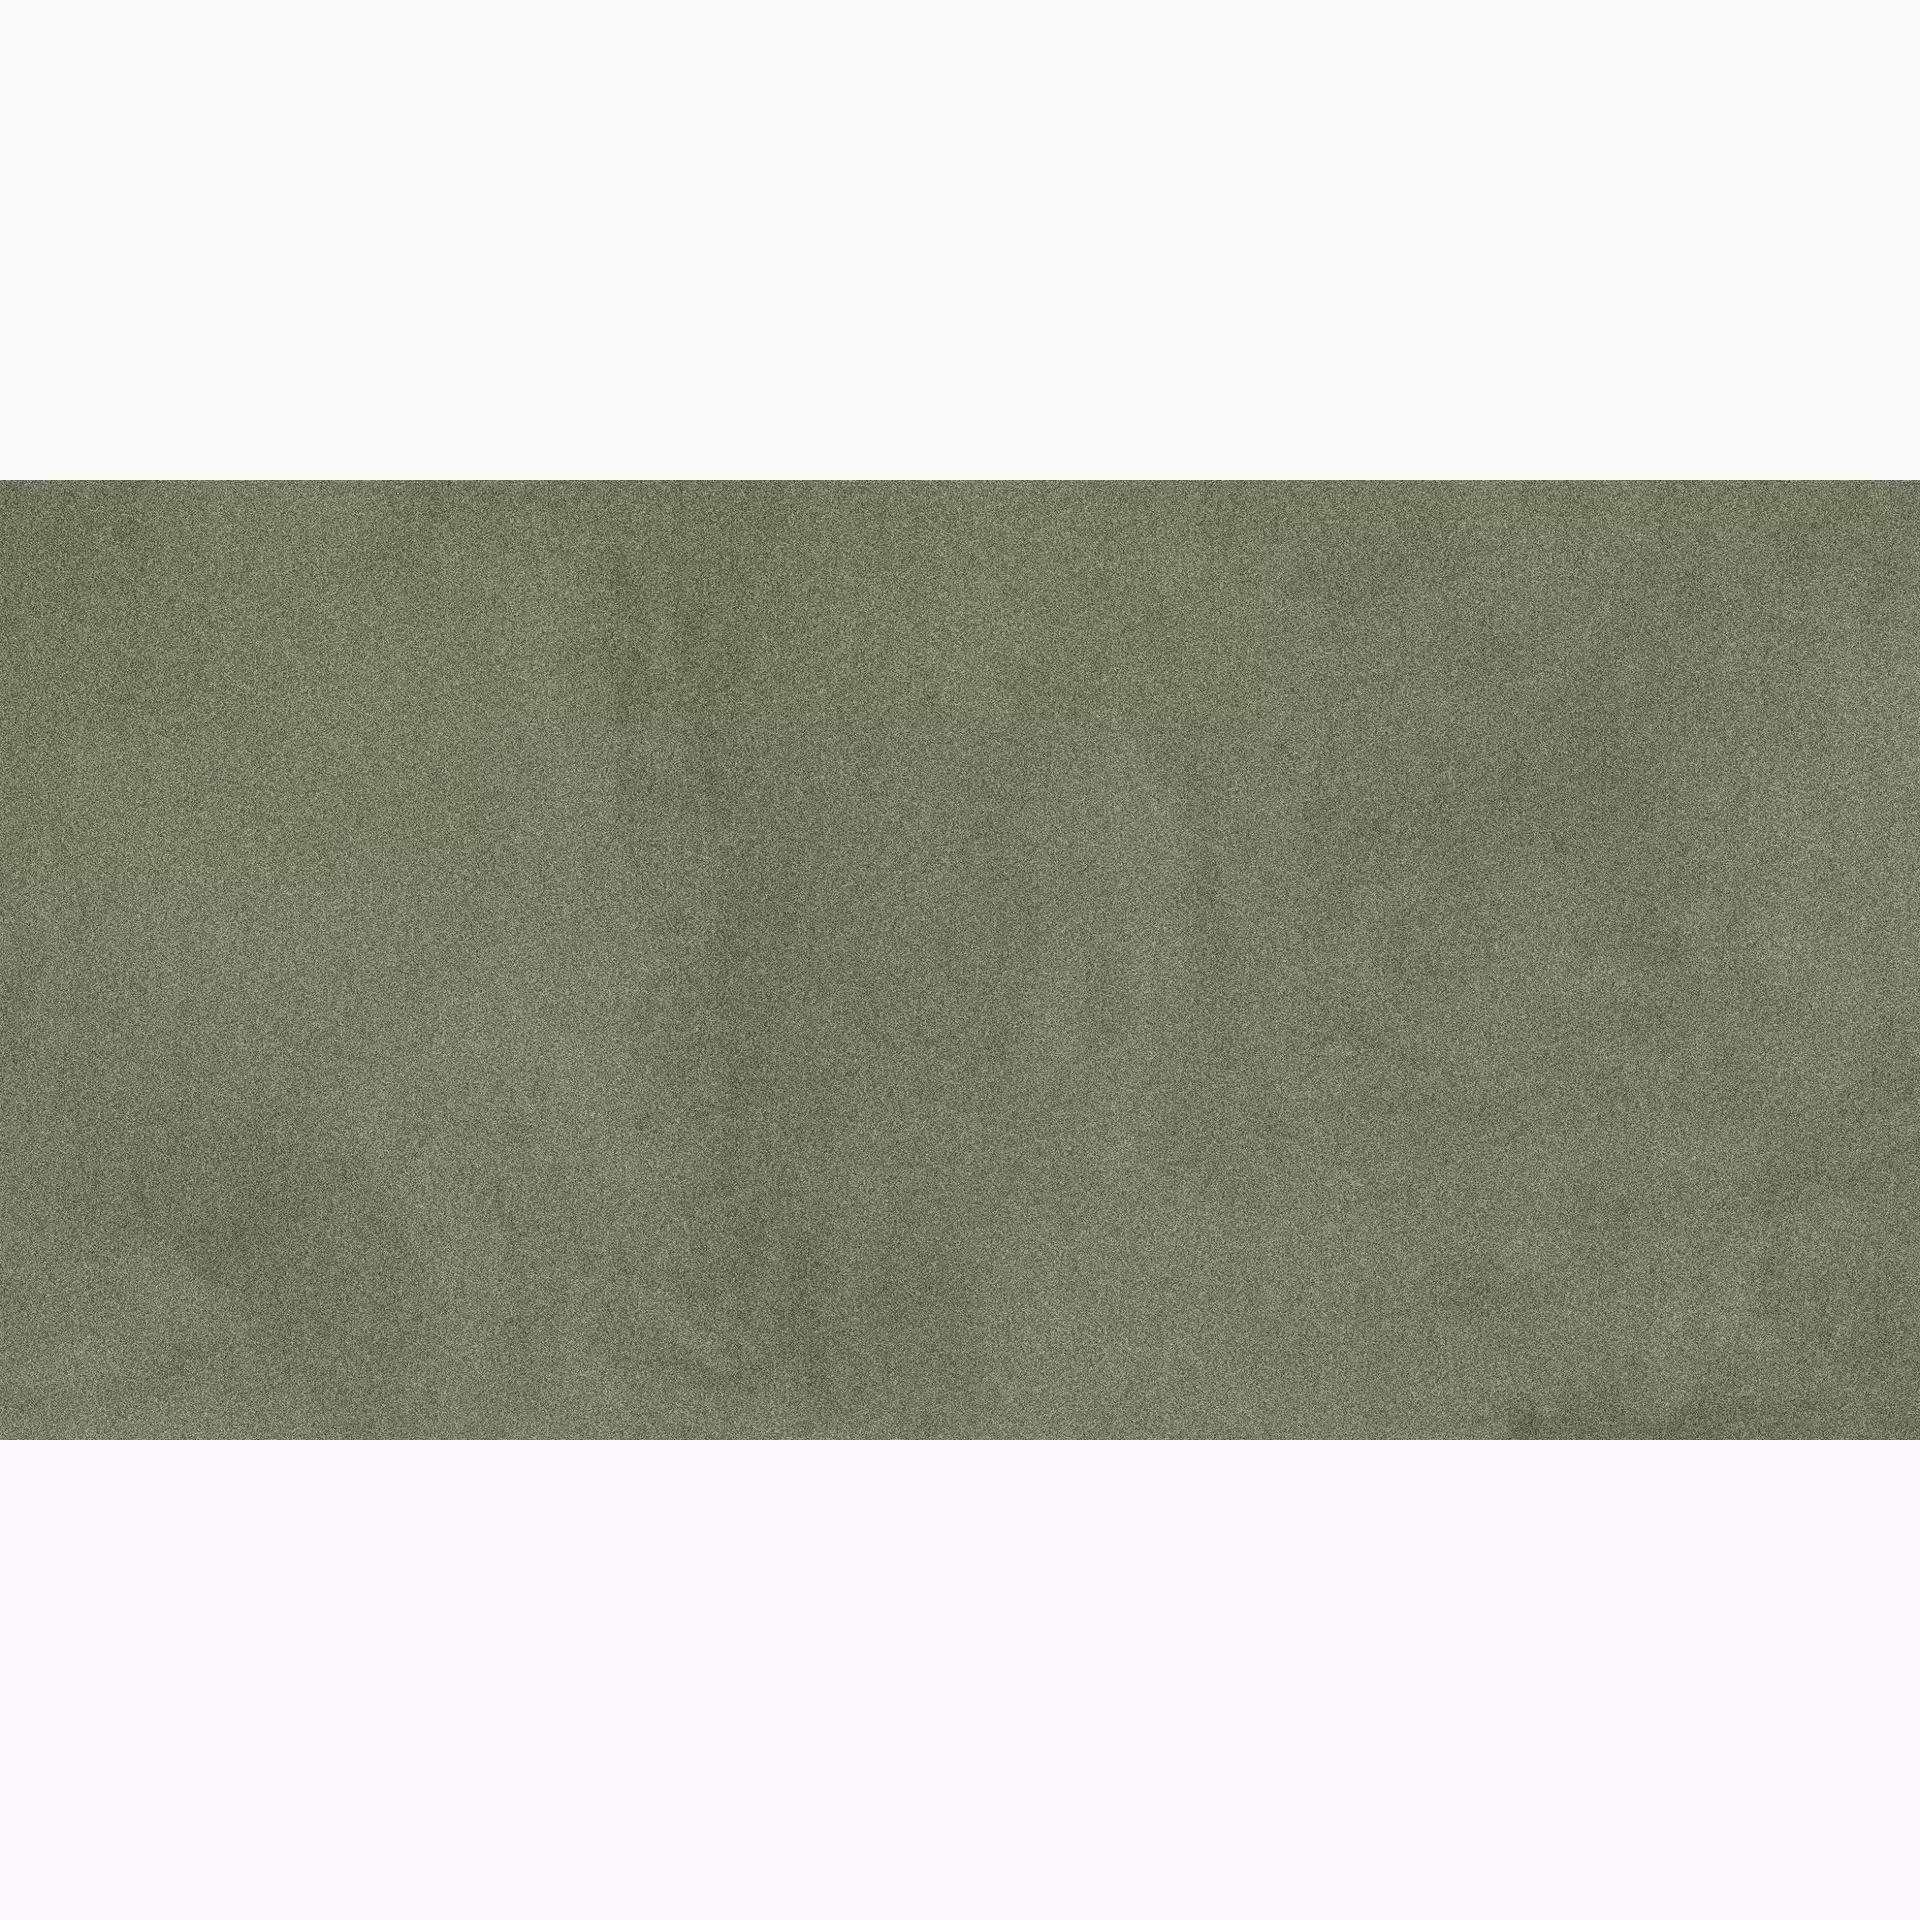 Atlasconcorde Boost Pro Taupe Outdoor Taupe A4XW outdoor 60x120cm rektifiziert 20mm